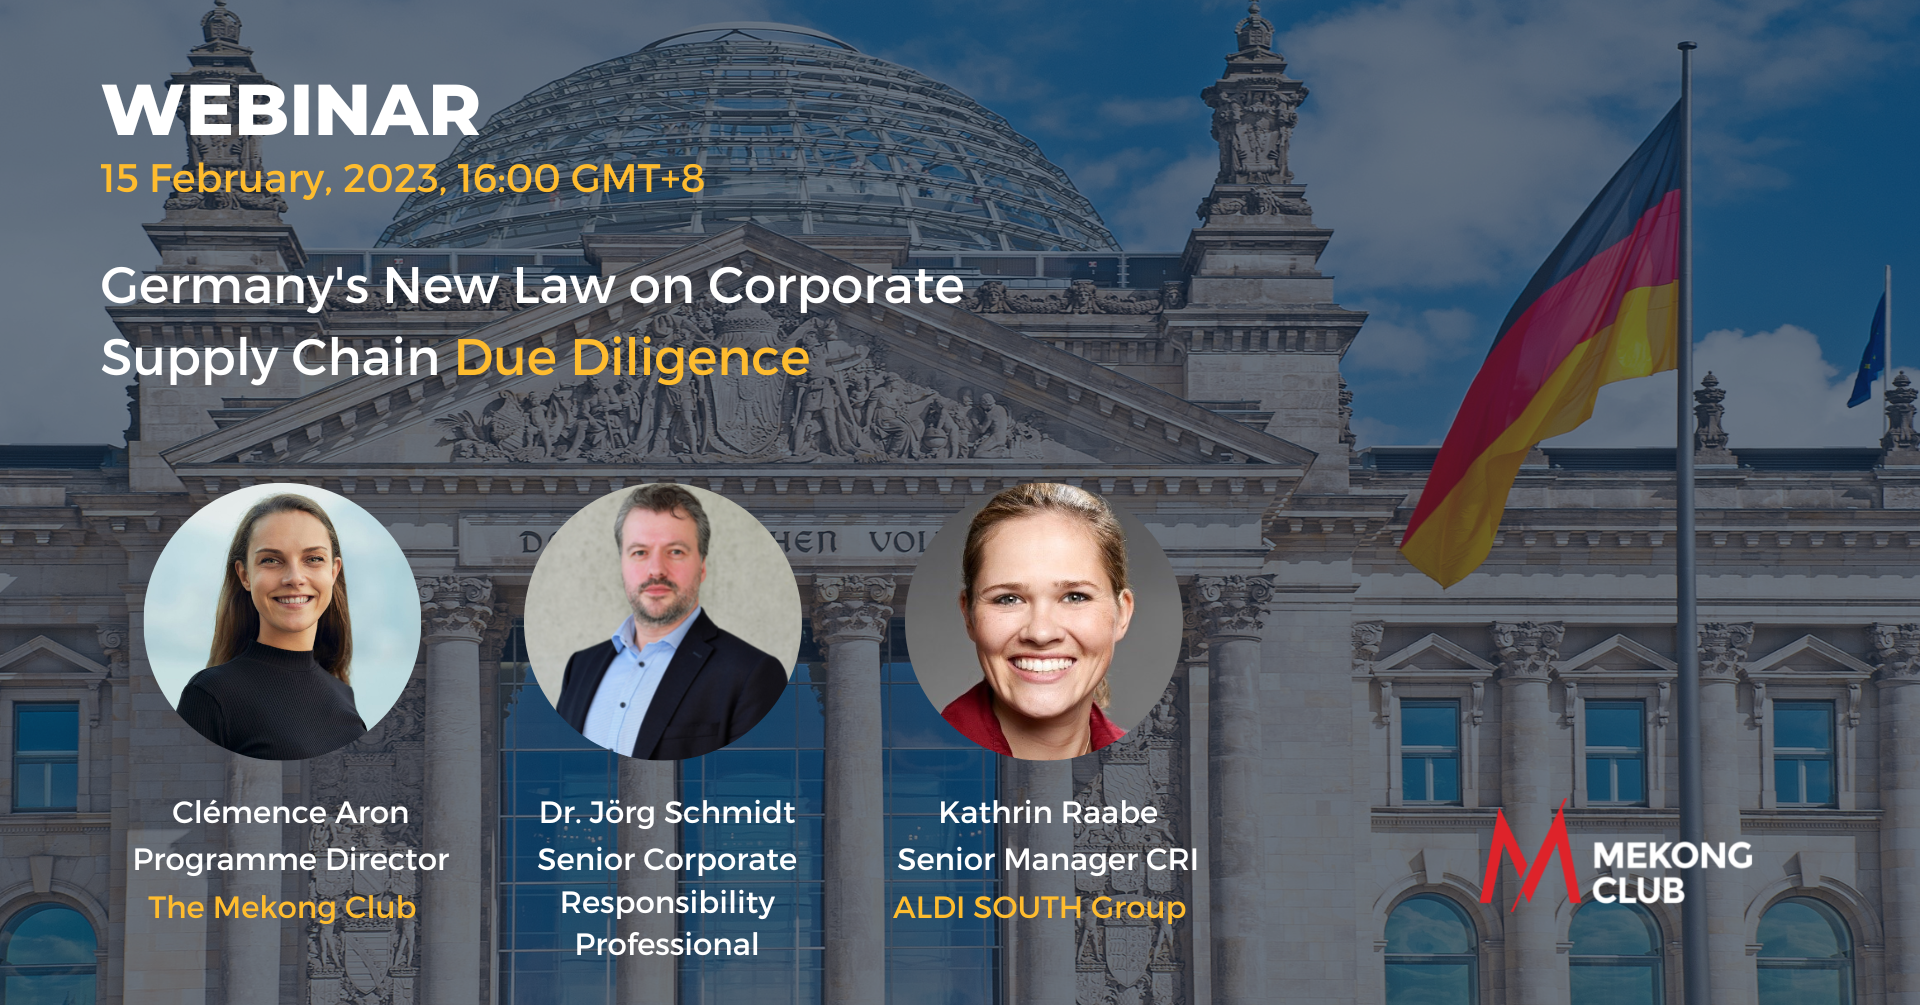 Webinar: Germany’s New Law on Corporate Supply Chain Due Diligence